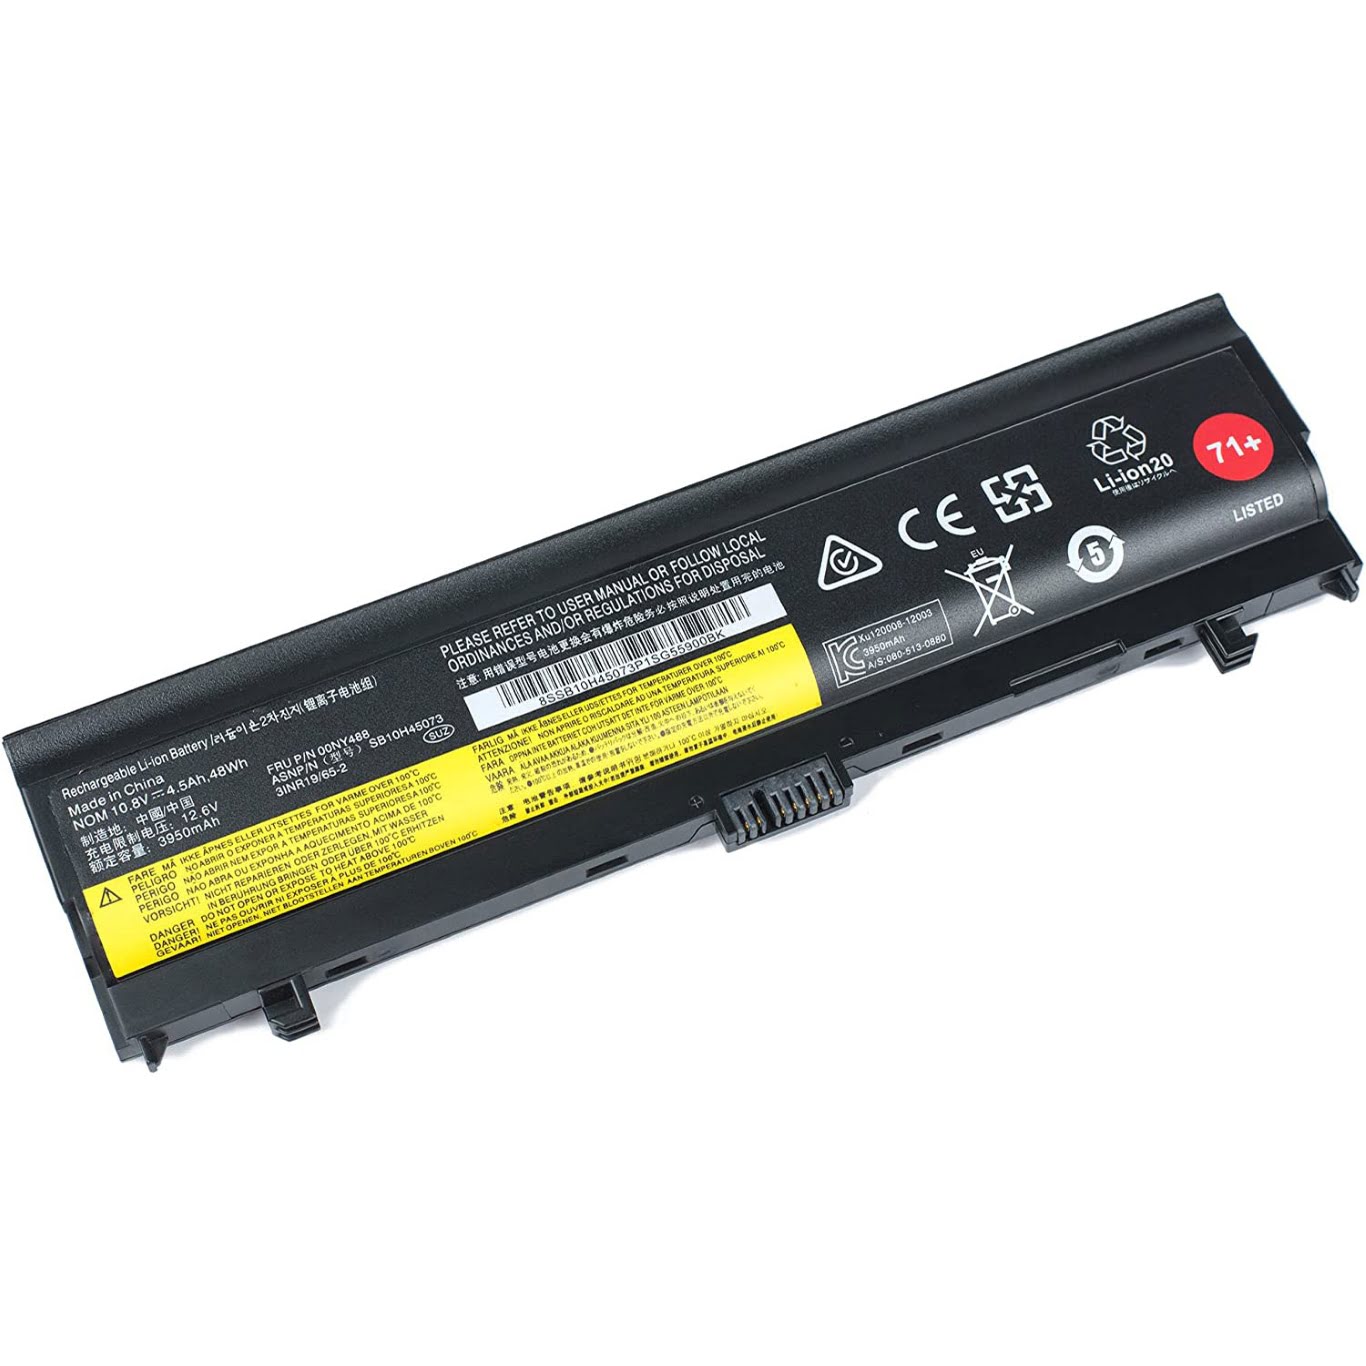 Lenovo 00ny486, 00ny488 Laptop Battery For L560-7cd, Thinkpad L560(20f10022ge) replacement